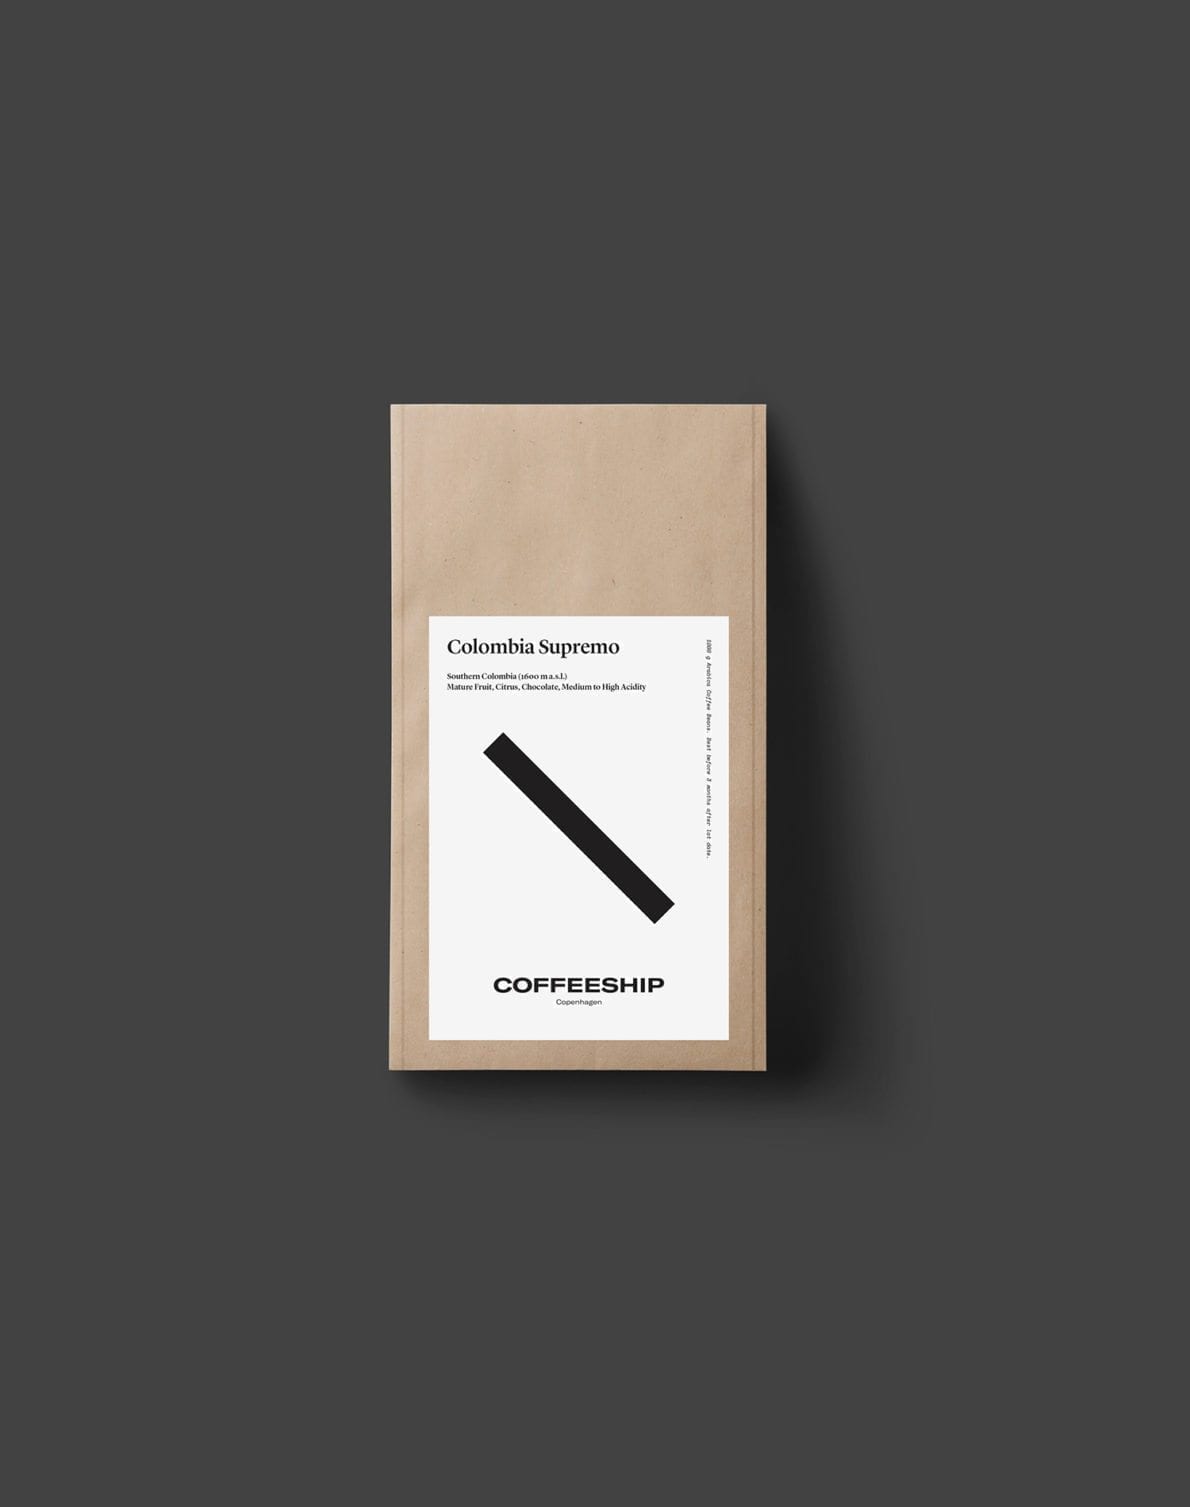 Office Coffee Subscription